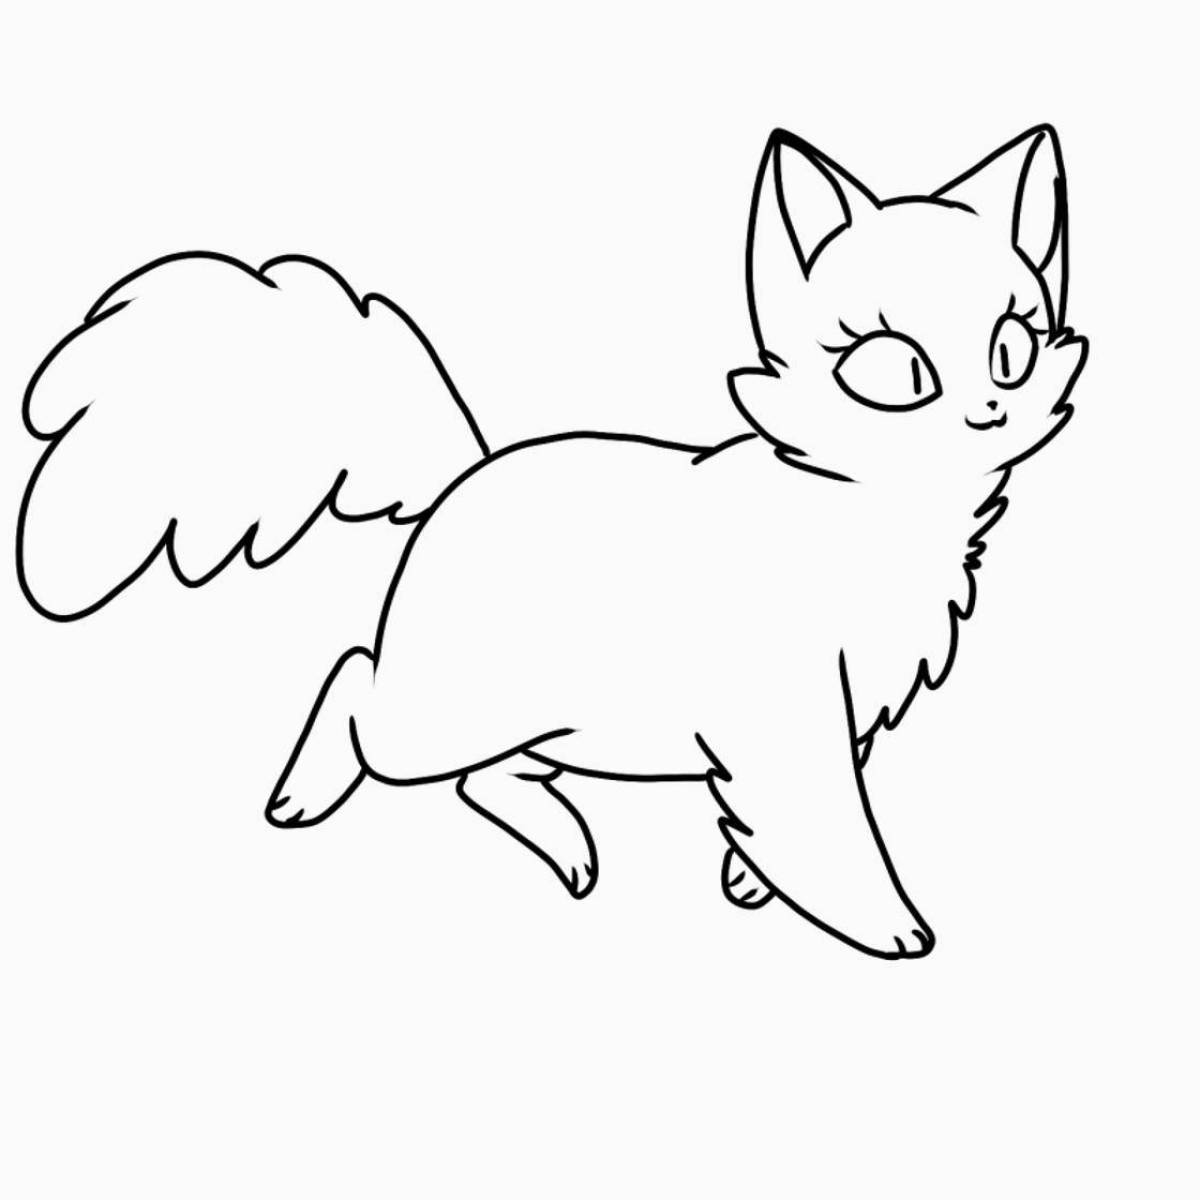 Coloring page funny flying cat